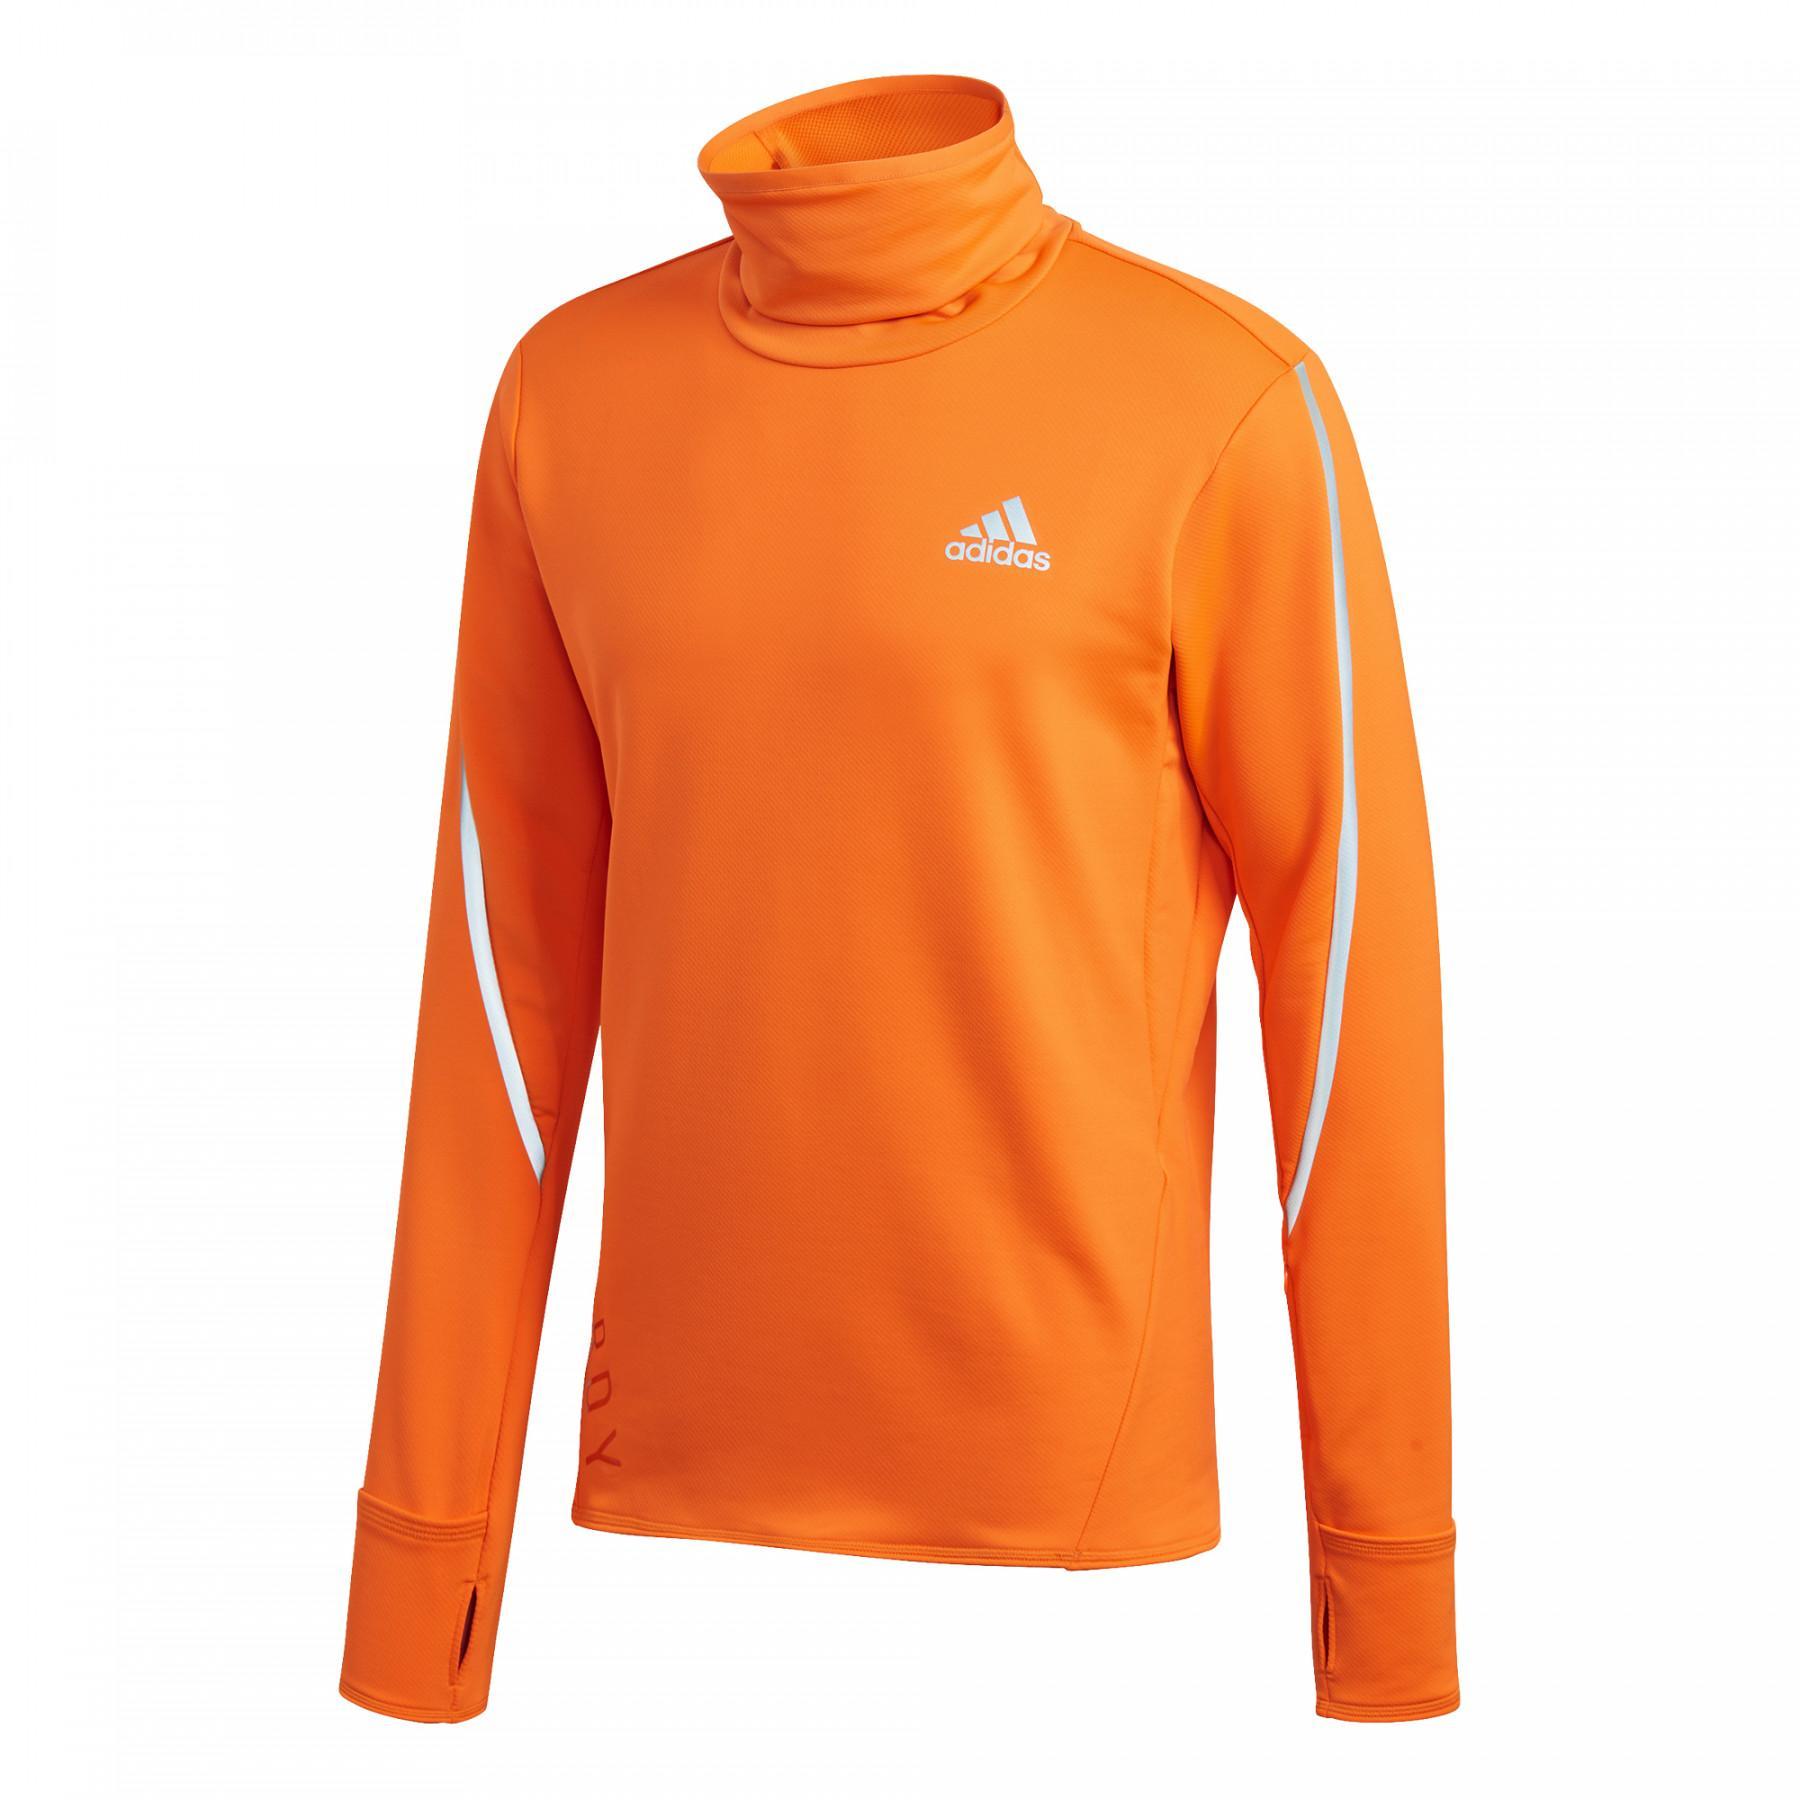 Bluza adidas Cold.rdy Cover-Up